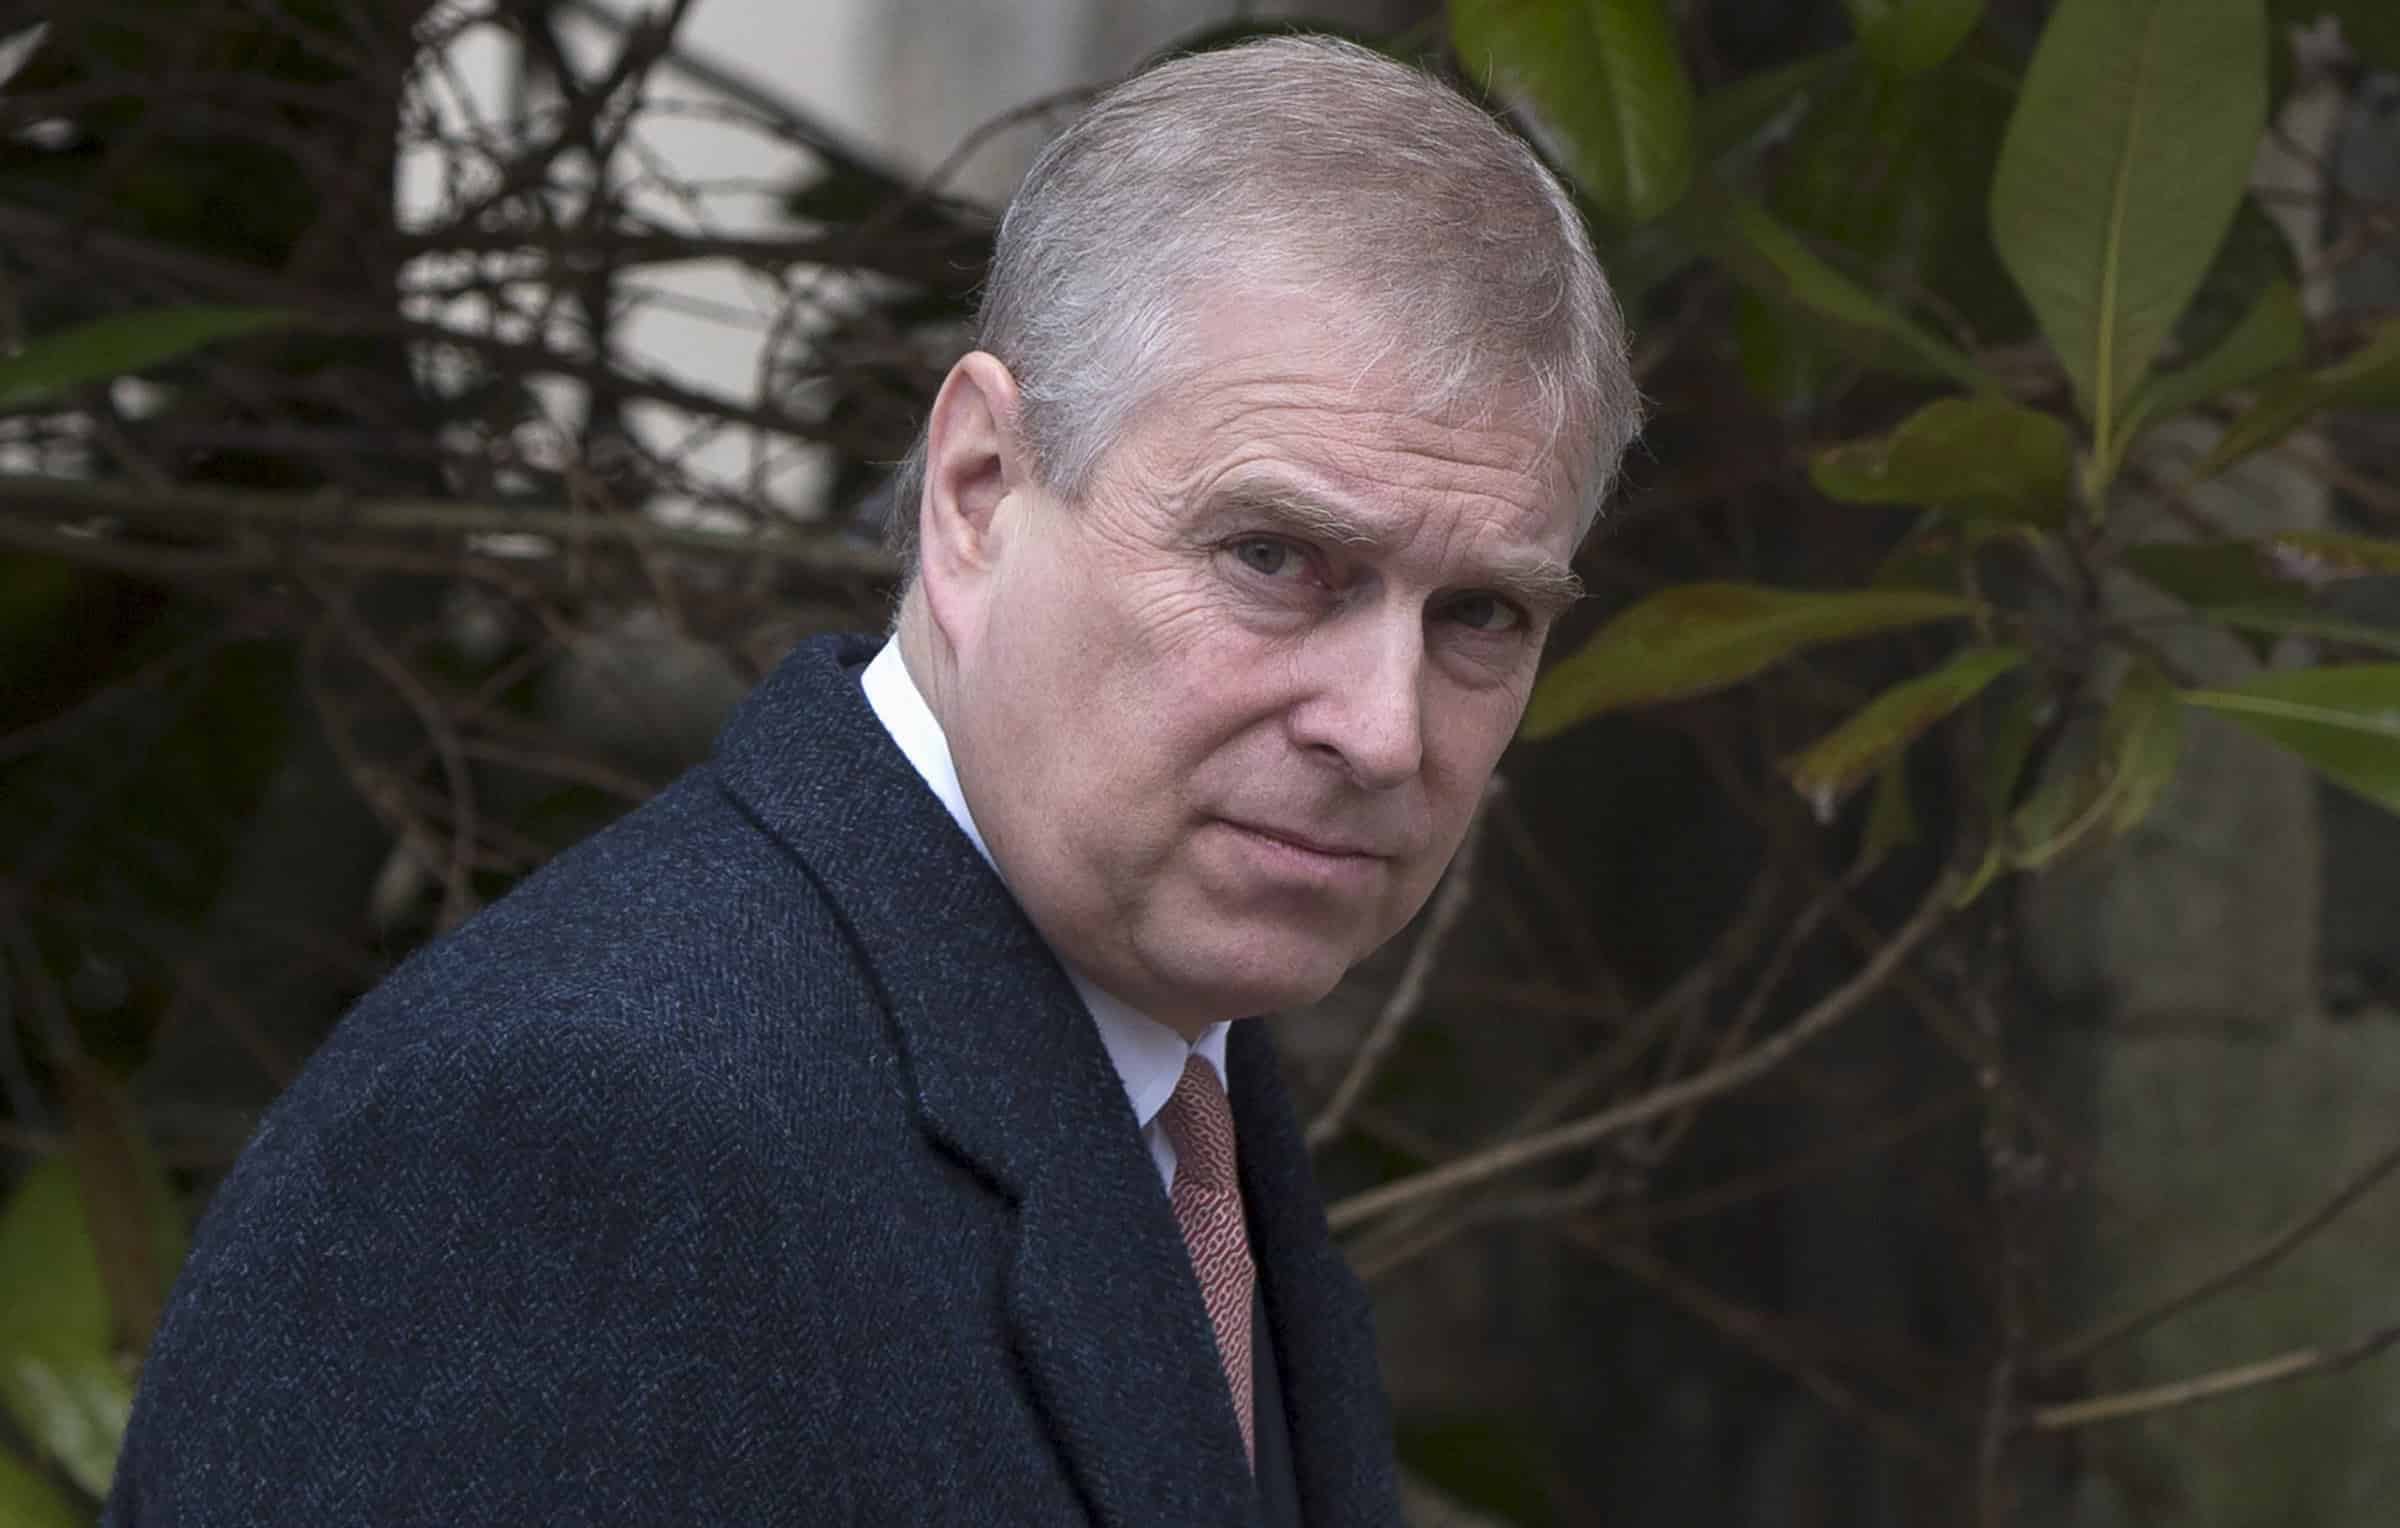 ‘Stop wasting time:’ Prince Andrew’s lawyer told to stop stalling over rape lawsuit